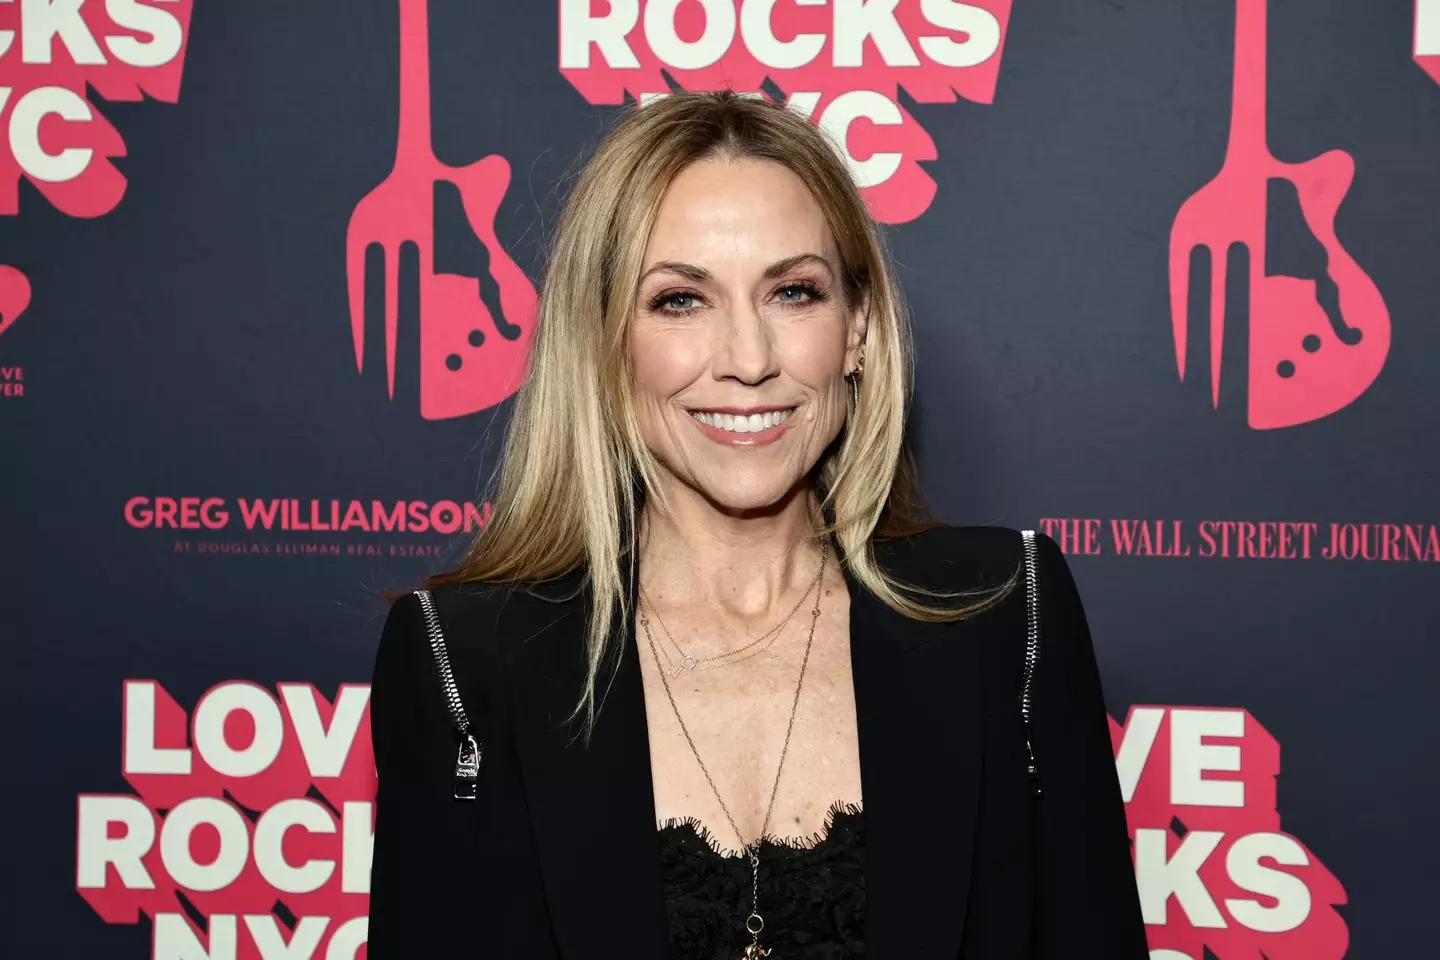 Sheryl Crow has hit back saying she was from a small town and accused the song of 'promoting violence'.